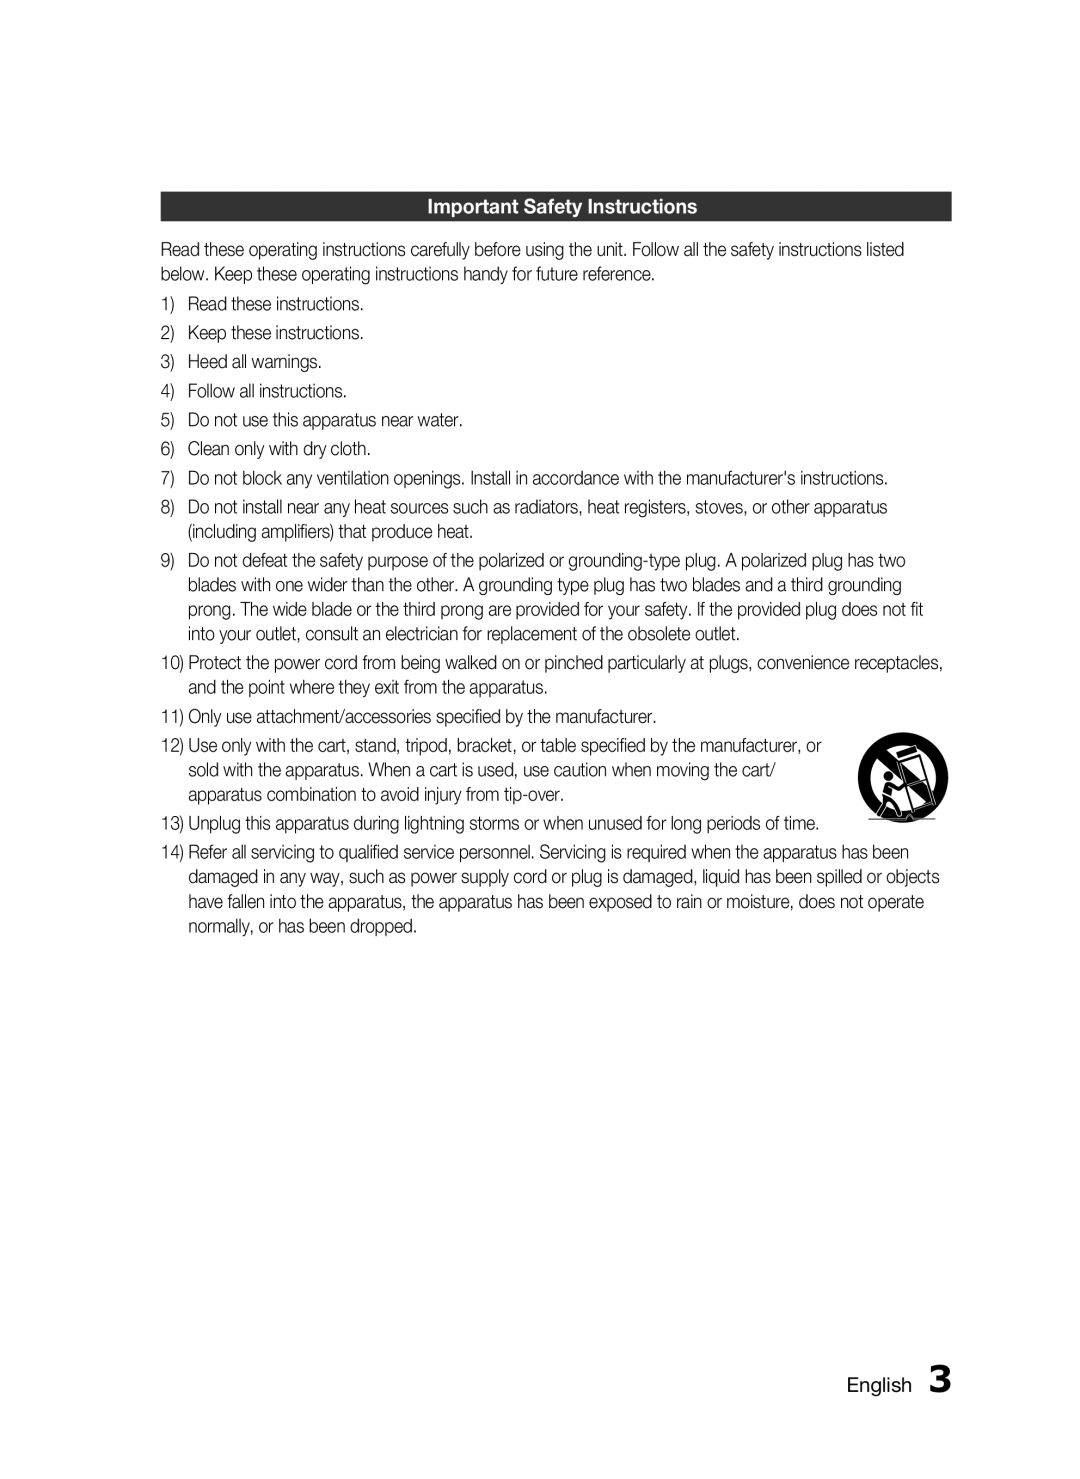 Samsung HW-D7000 user manual Important Safety Instructions, English 